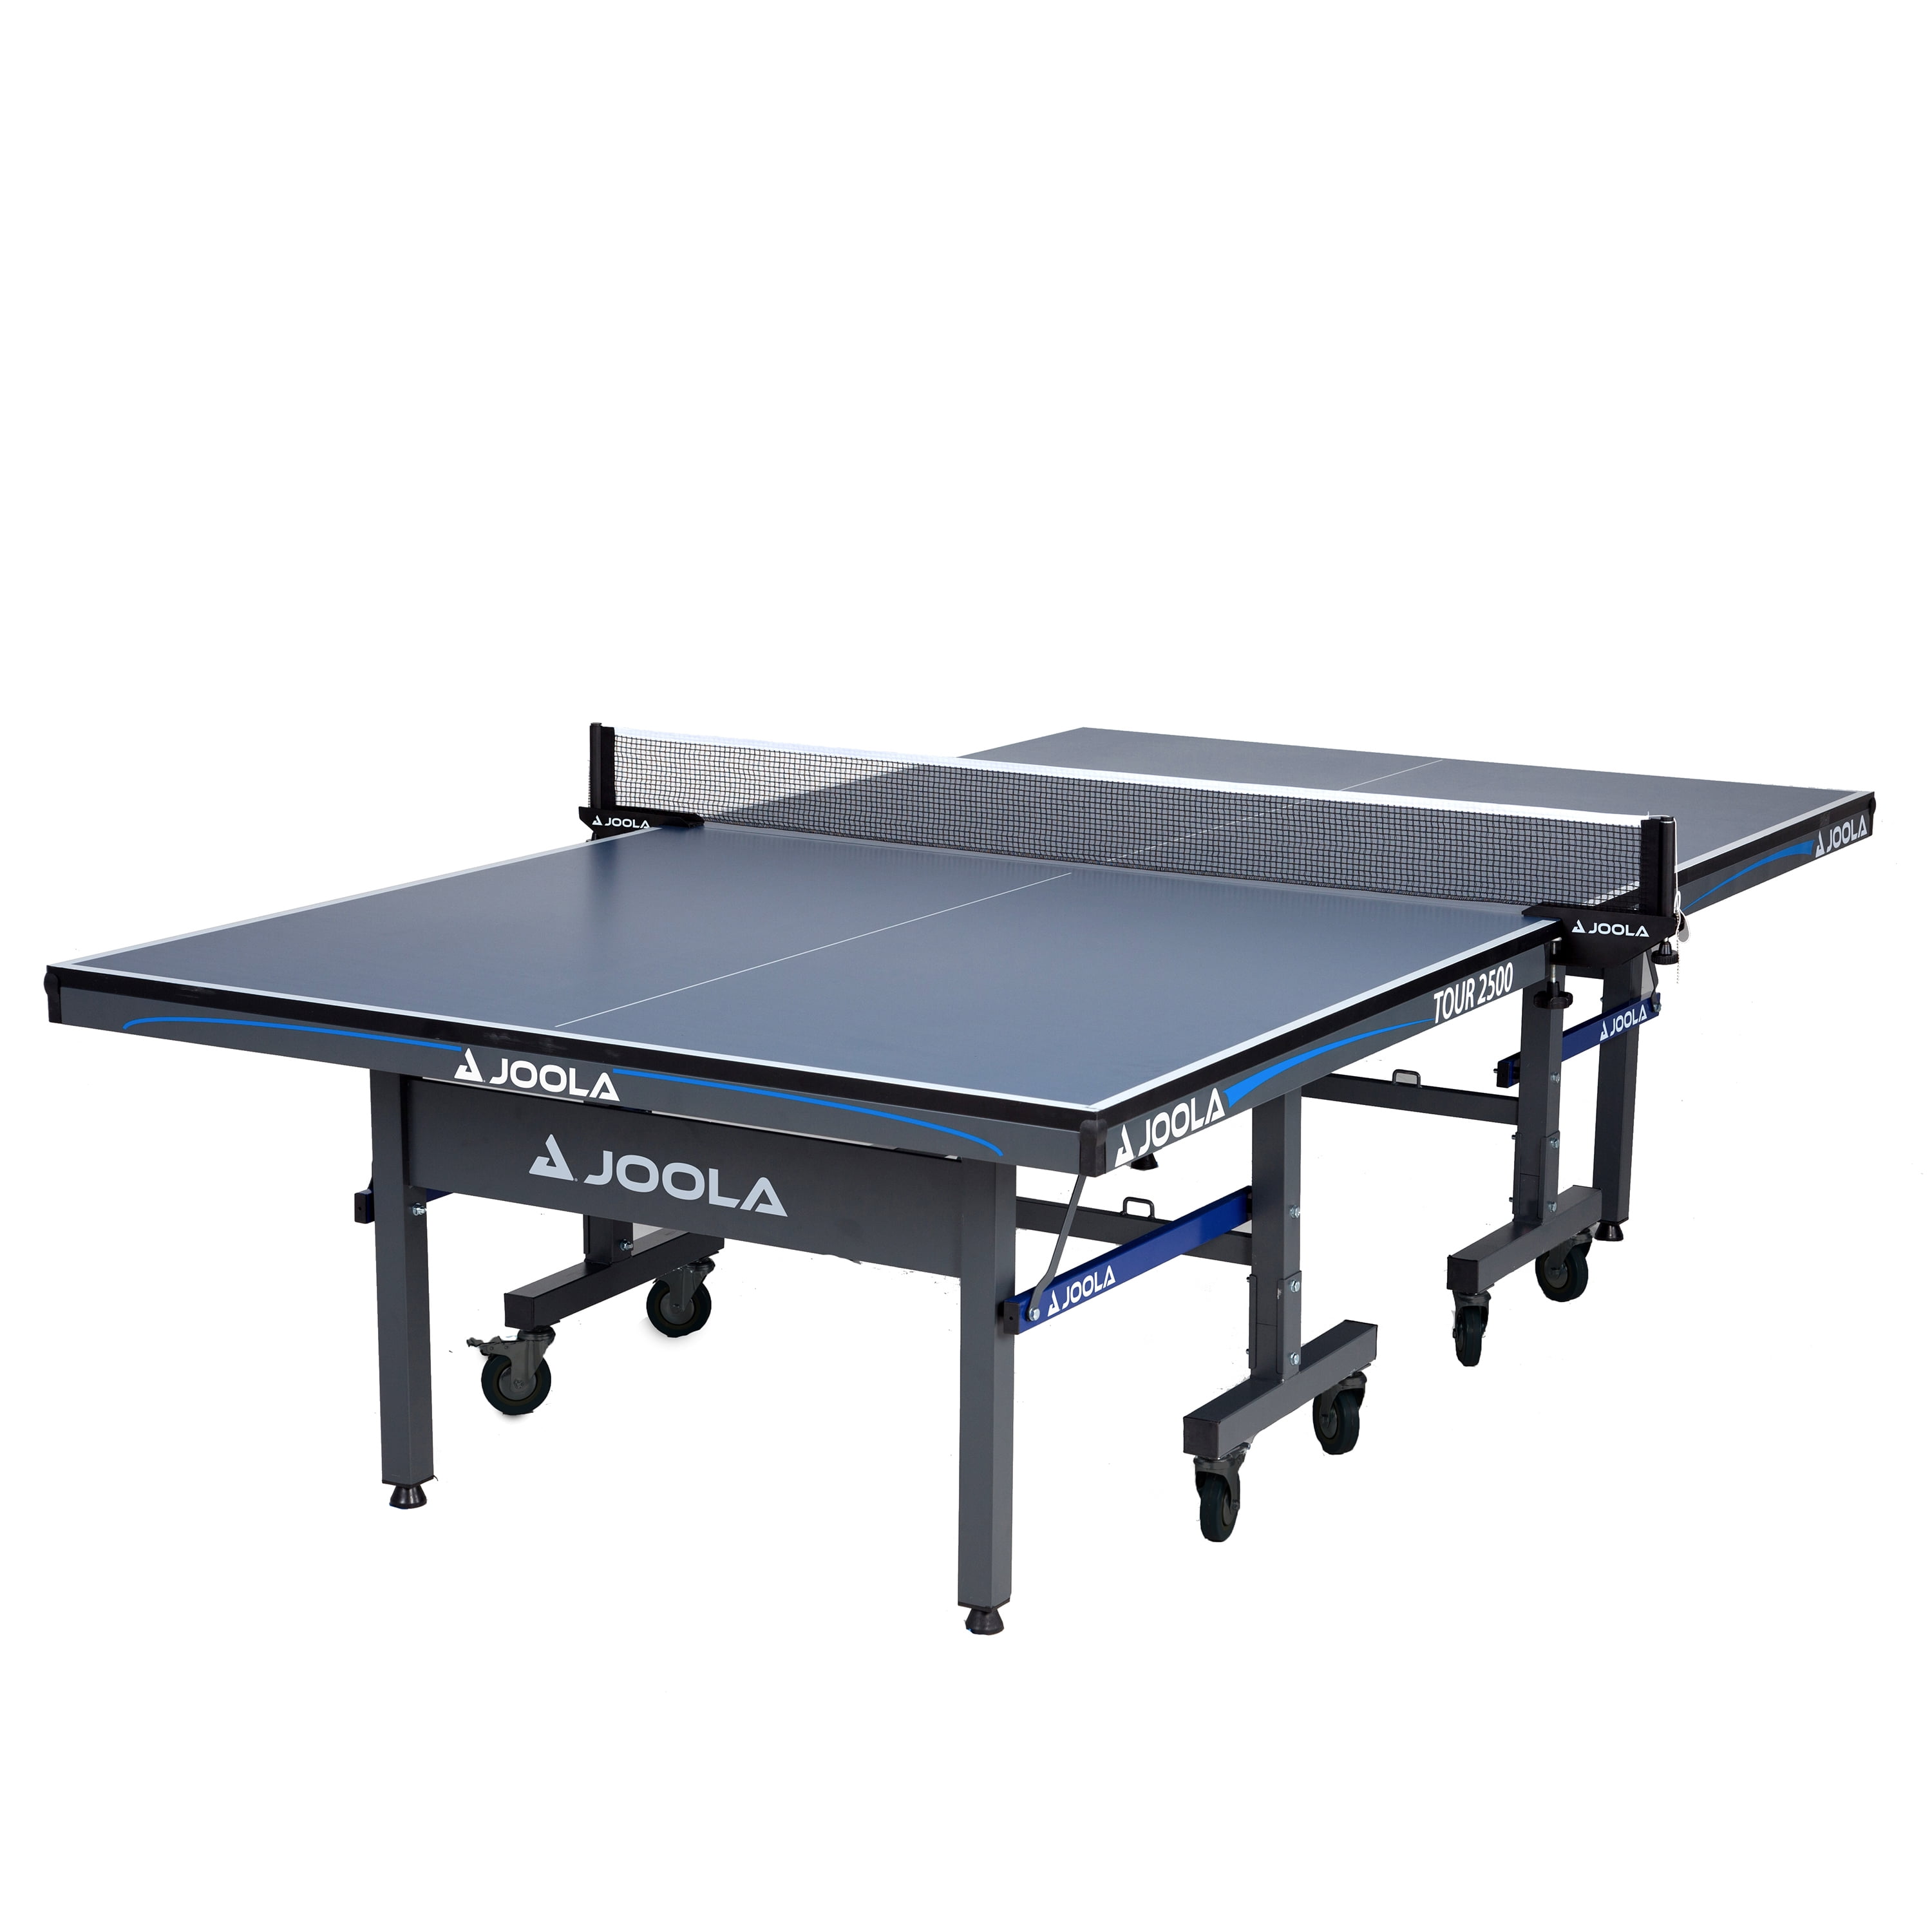 JOOLA Tour 1800 Table Tennis Table with Ping Pong Net Set, 18mm, 9\' x 5\',  Blue